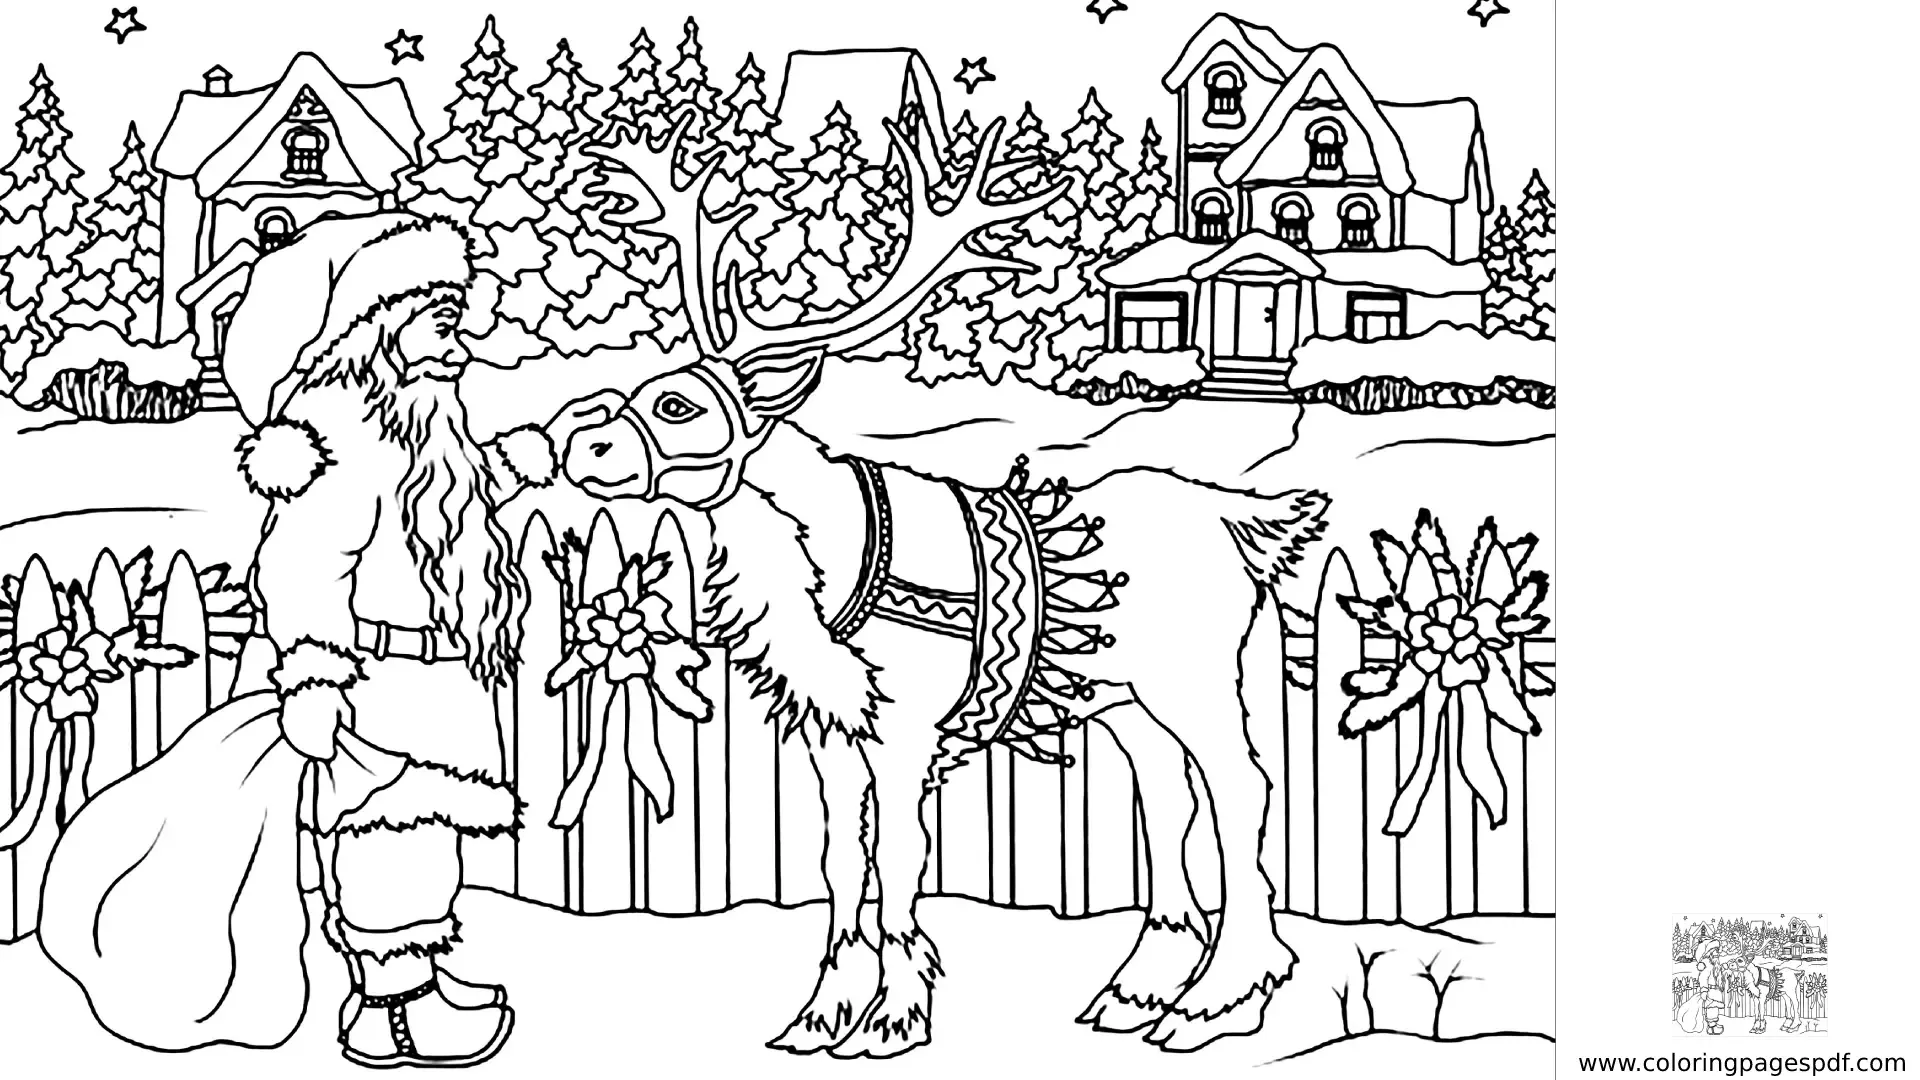 Coloring Page Of Santa With A Deer